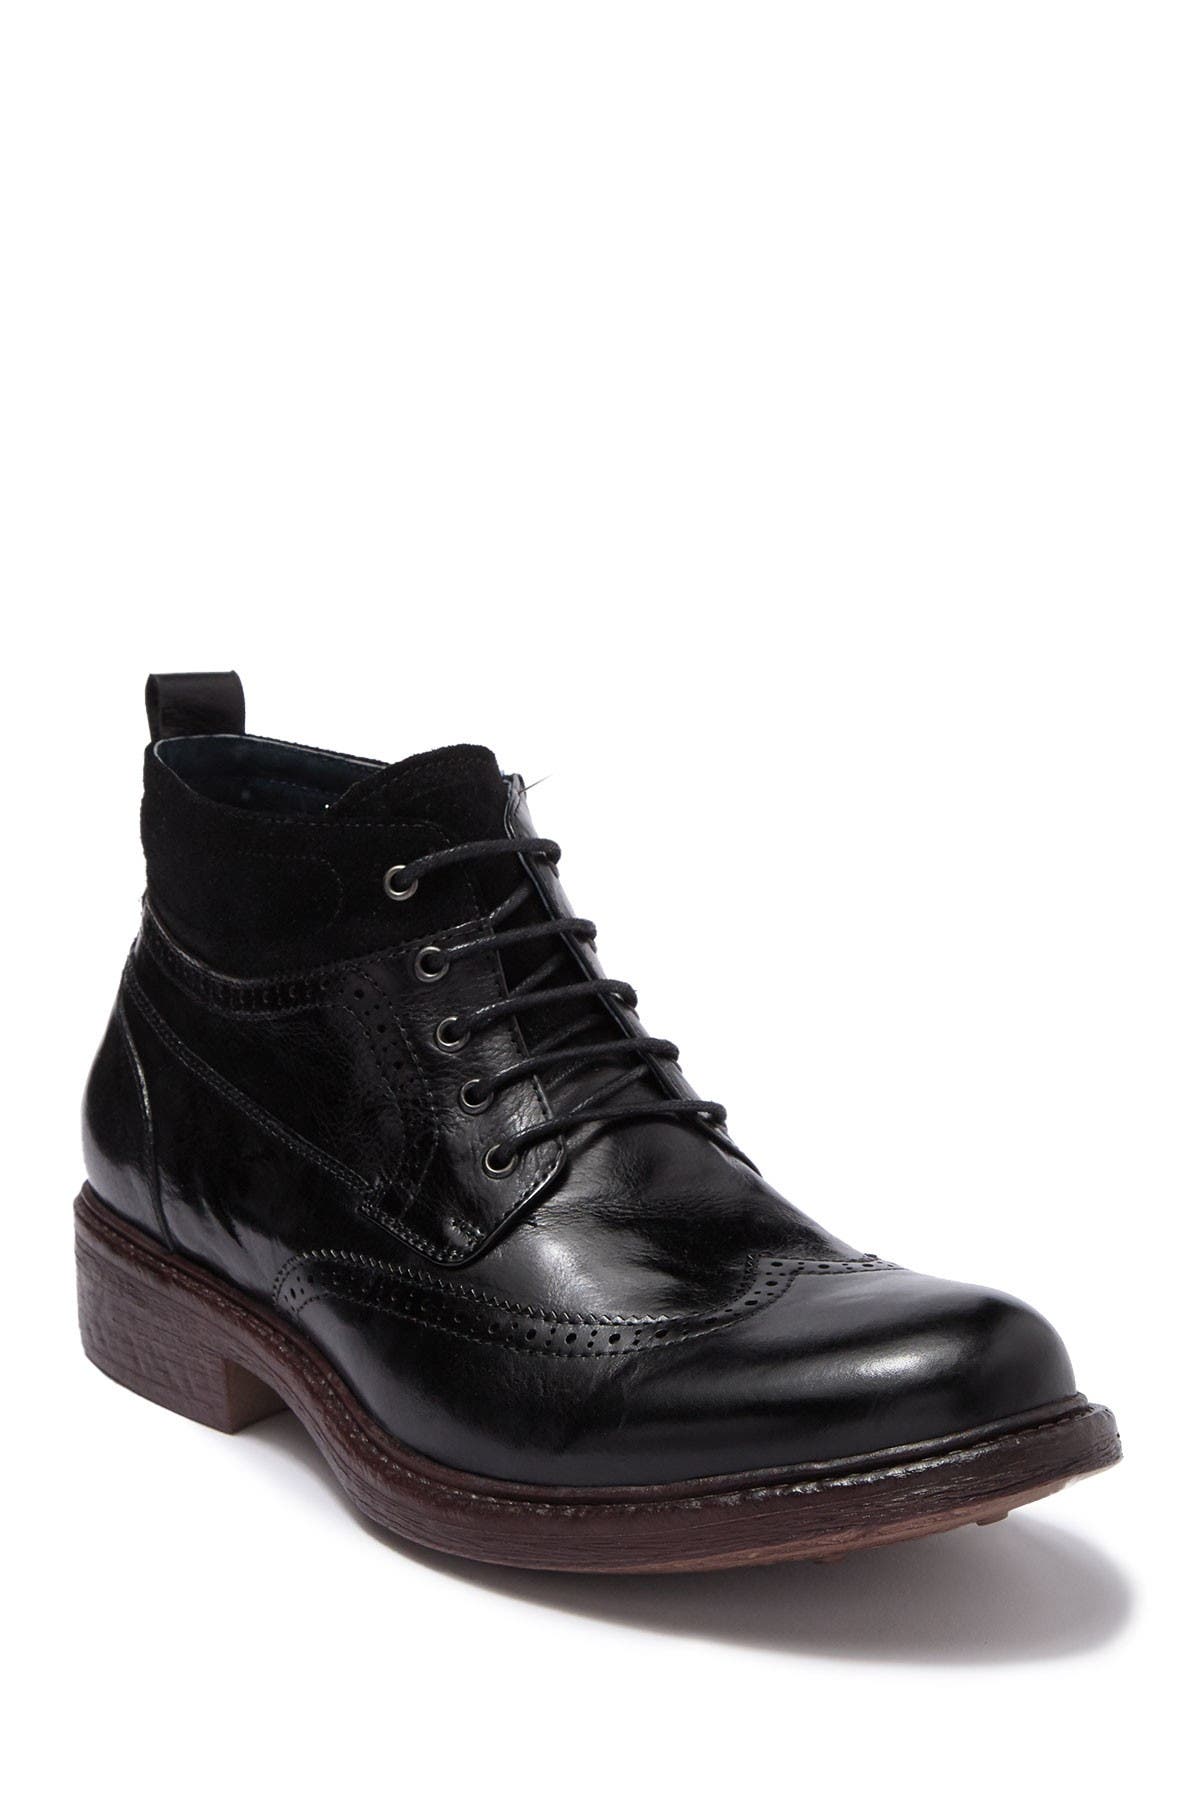 english laundry wess leather boot